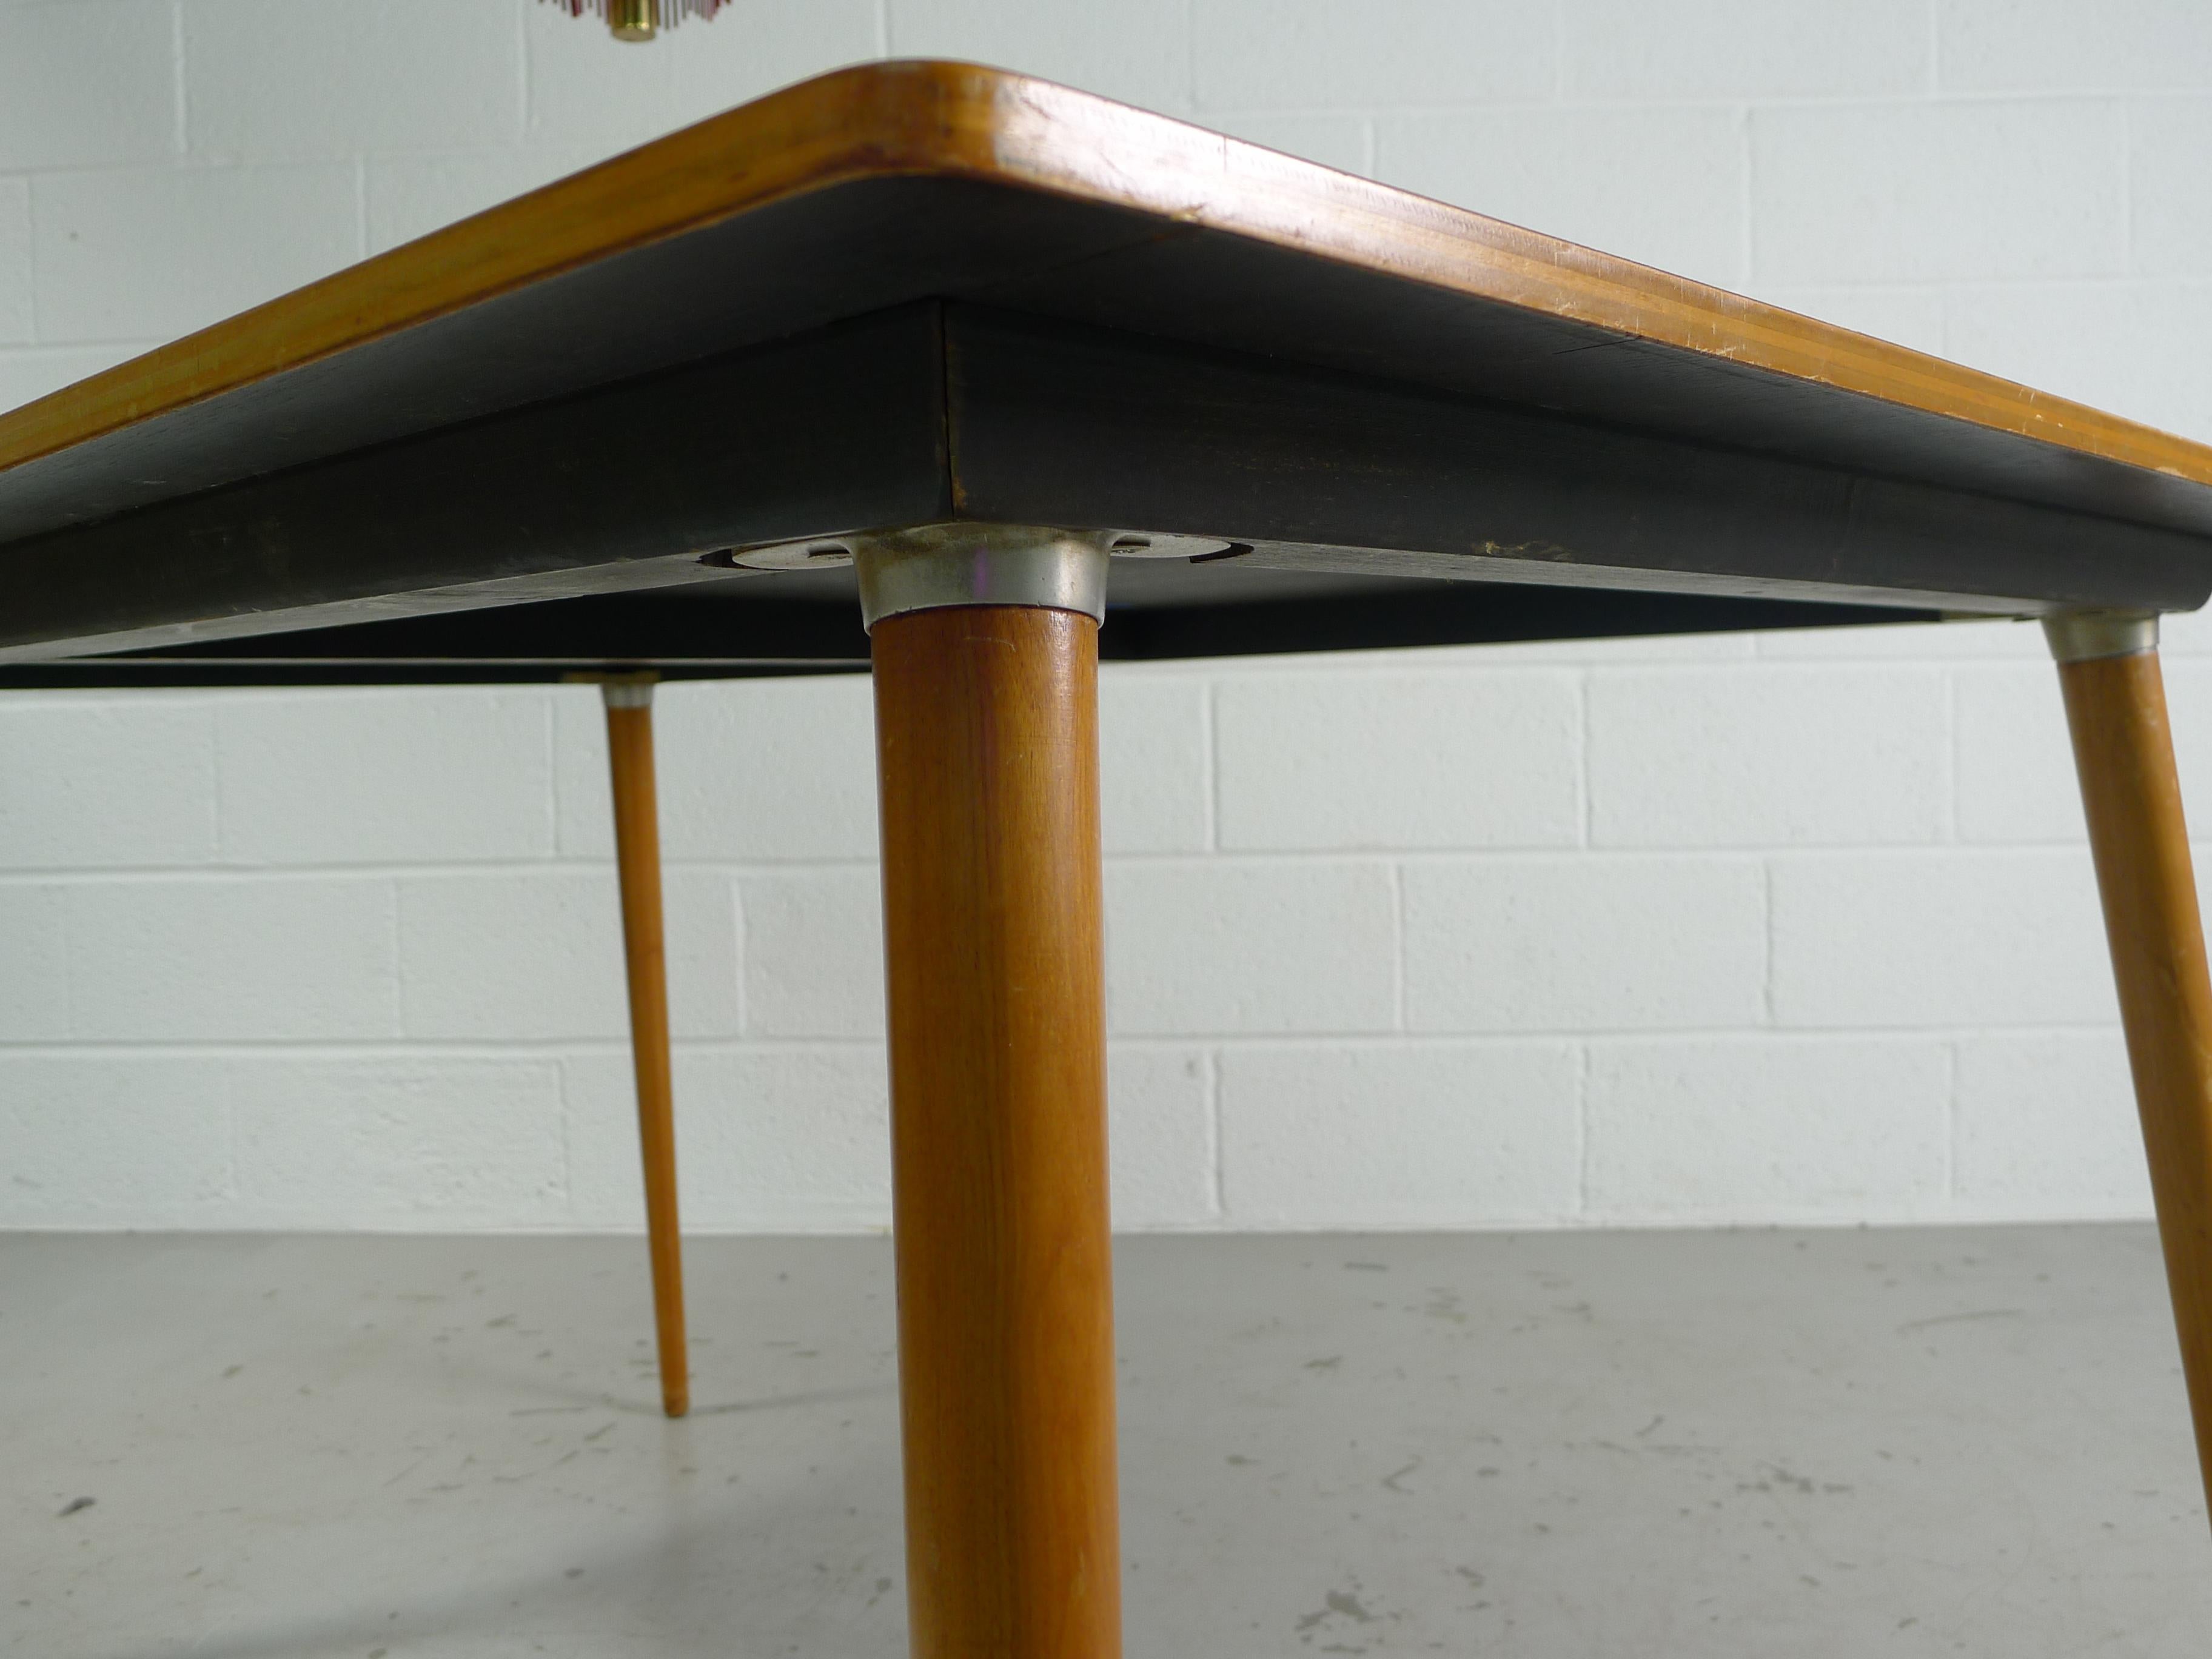 American Eames DTW-3 Birch Dining Table, circa 1950, Herman Miller Production